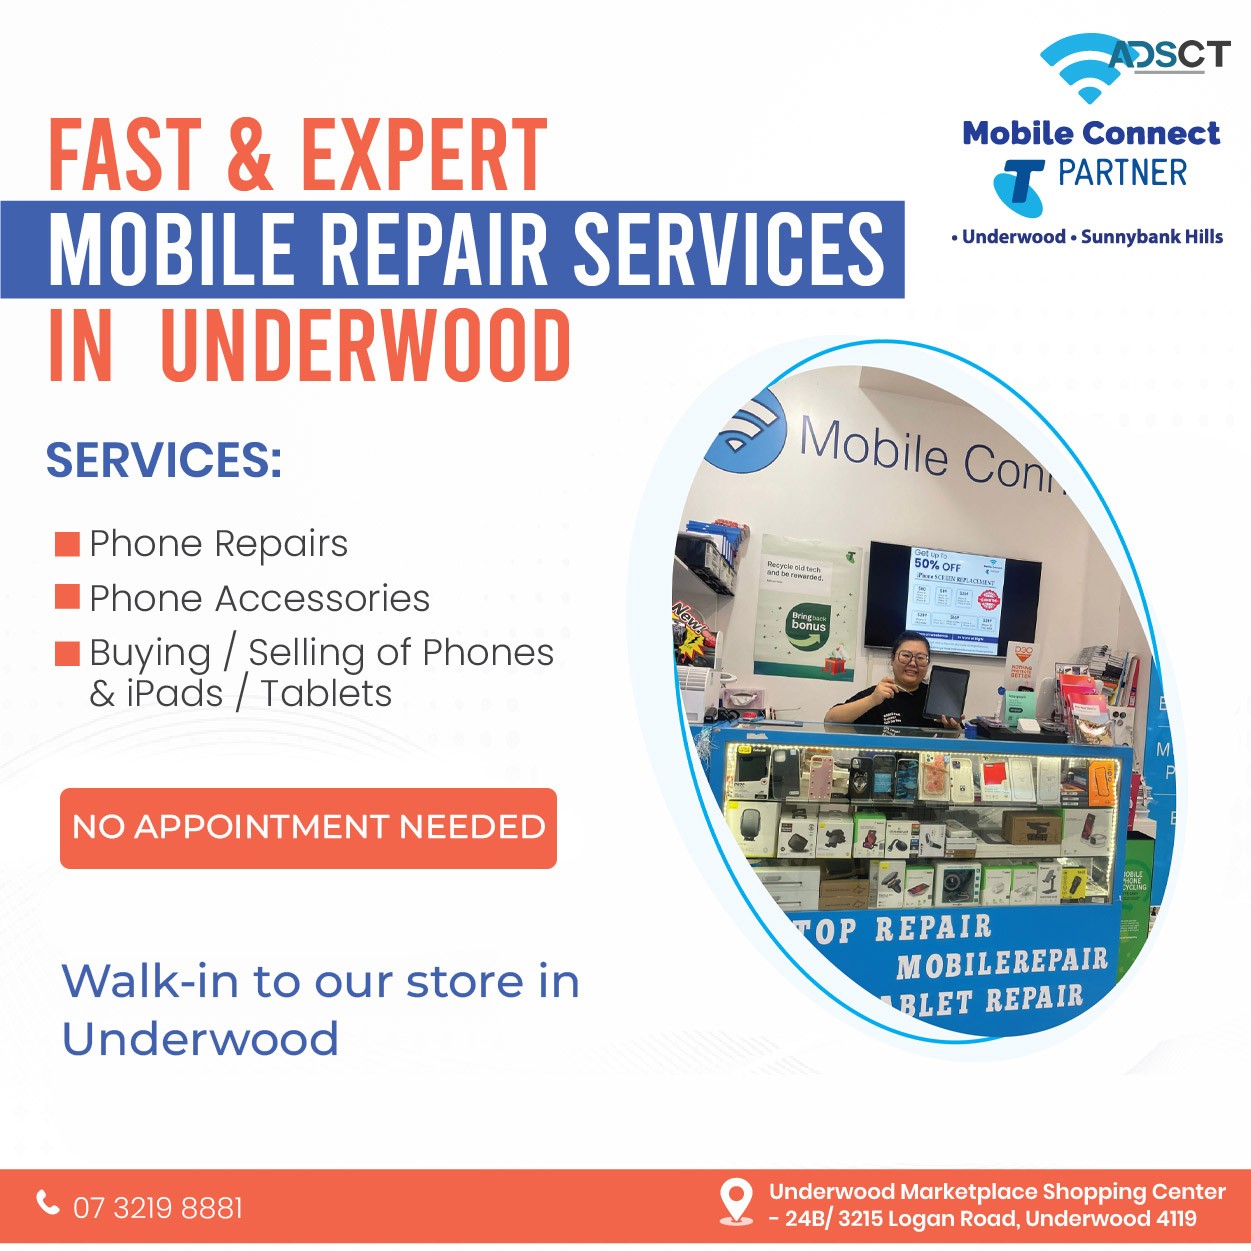 Fast and Expert Mobile Repair Services in Underwood